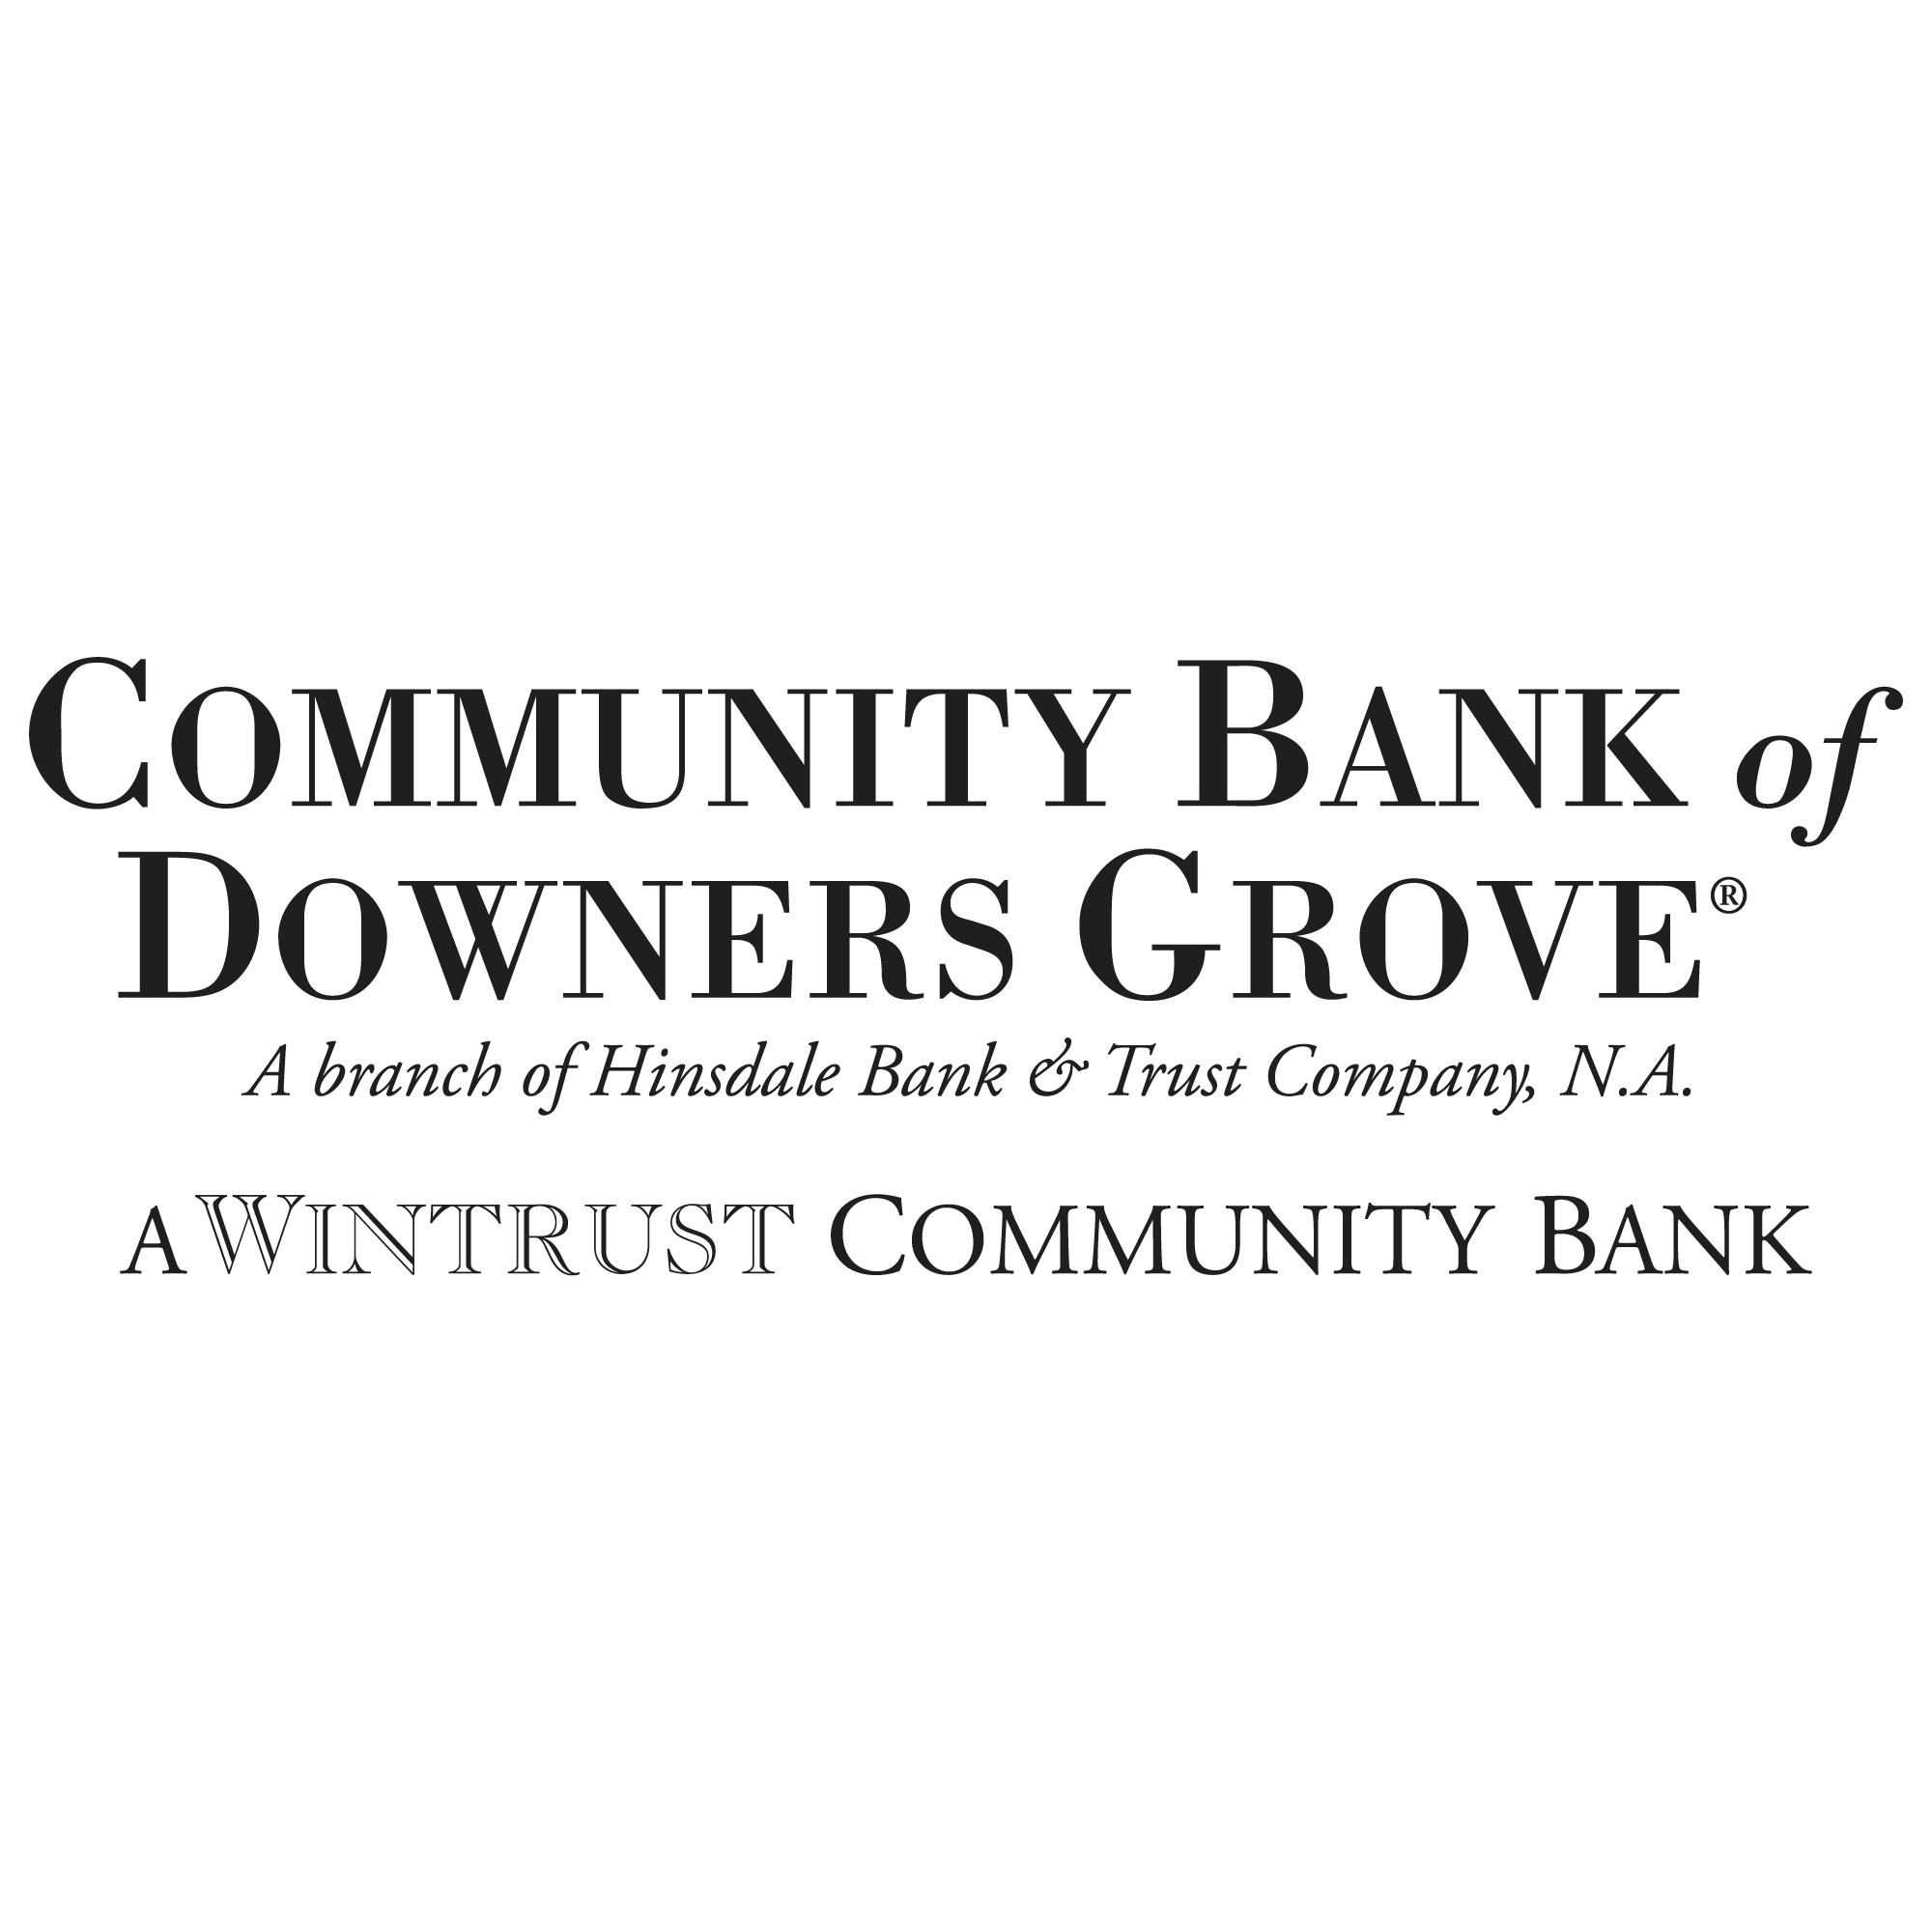 Community Bank of Downers Grove